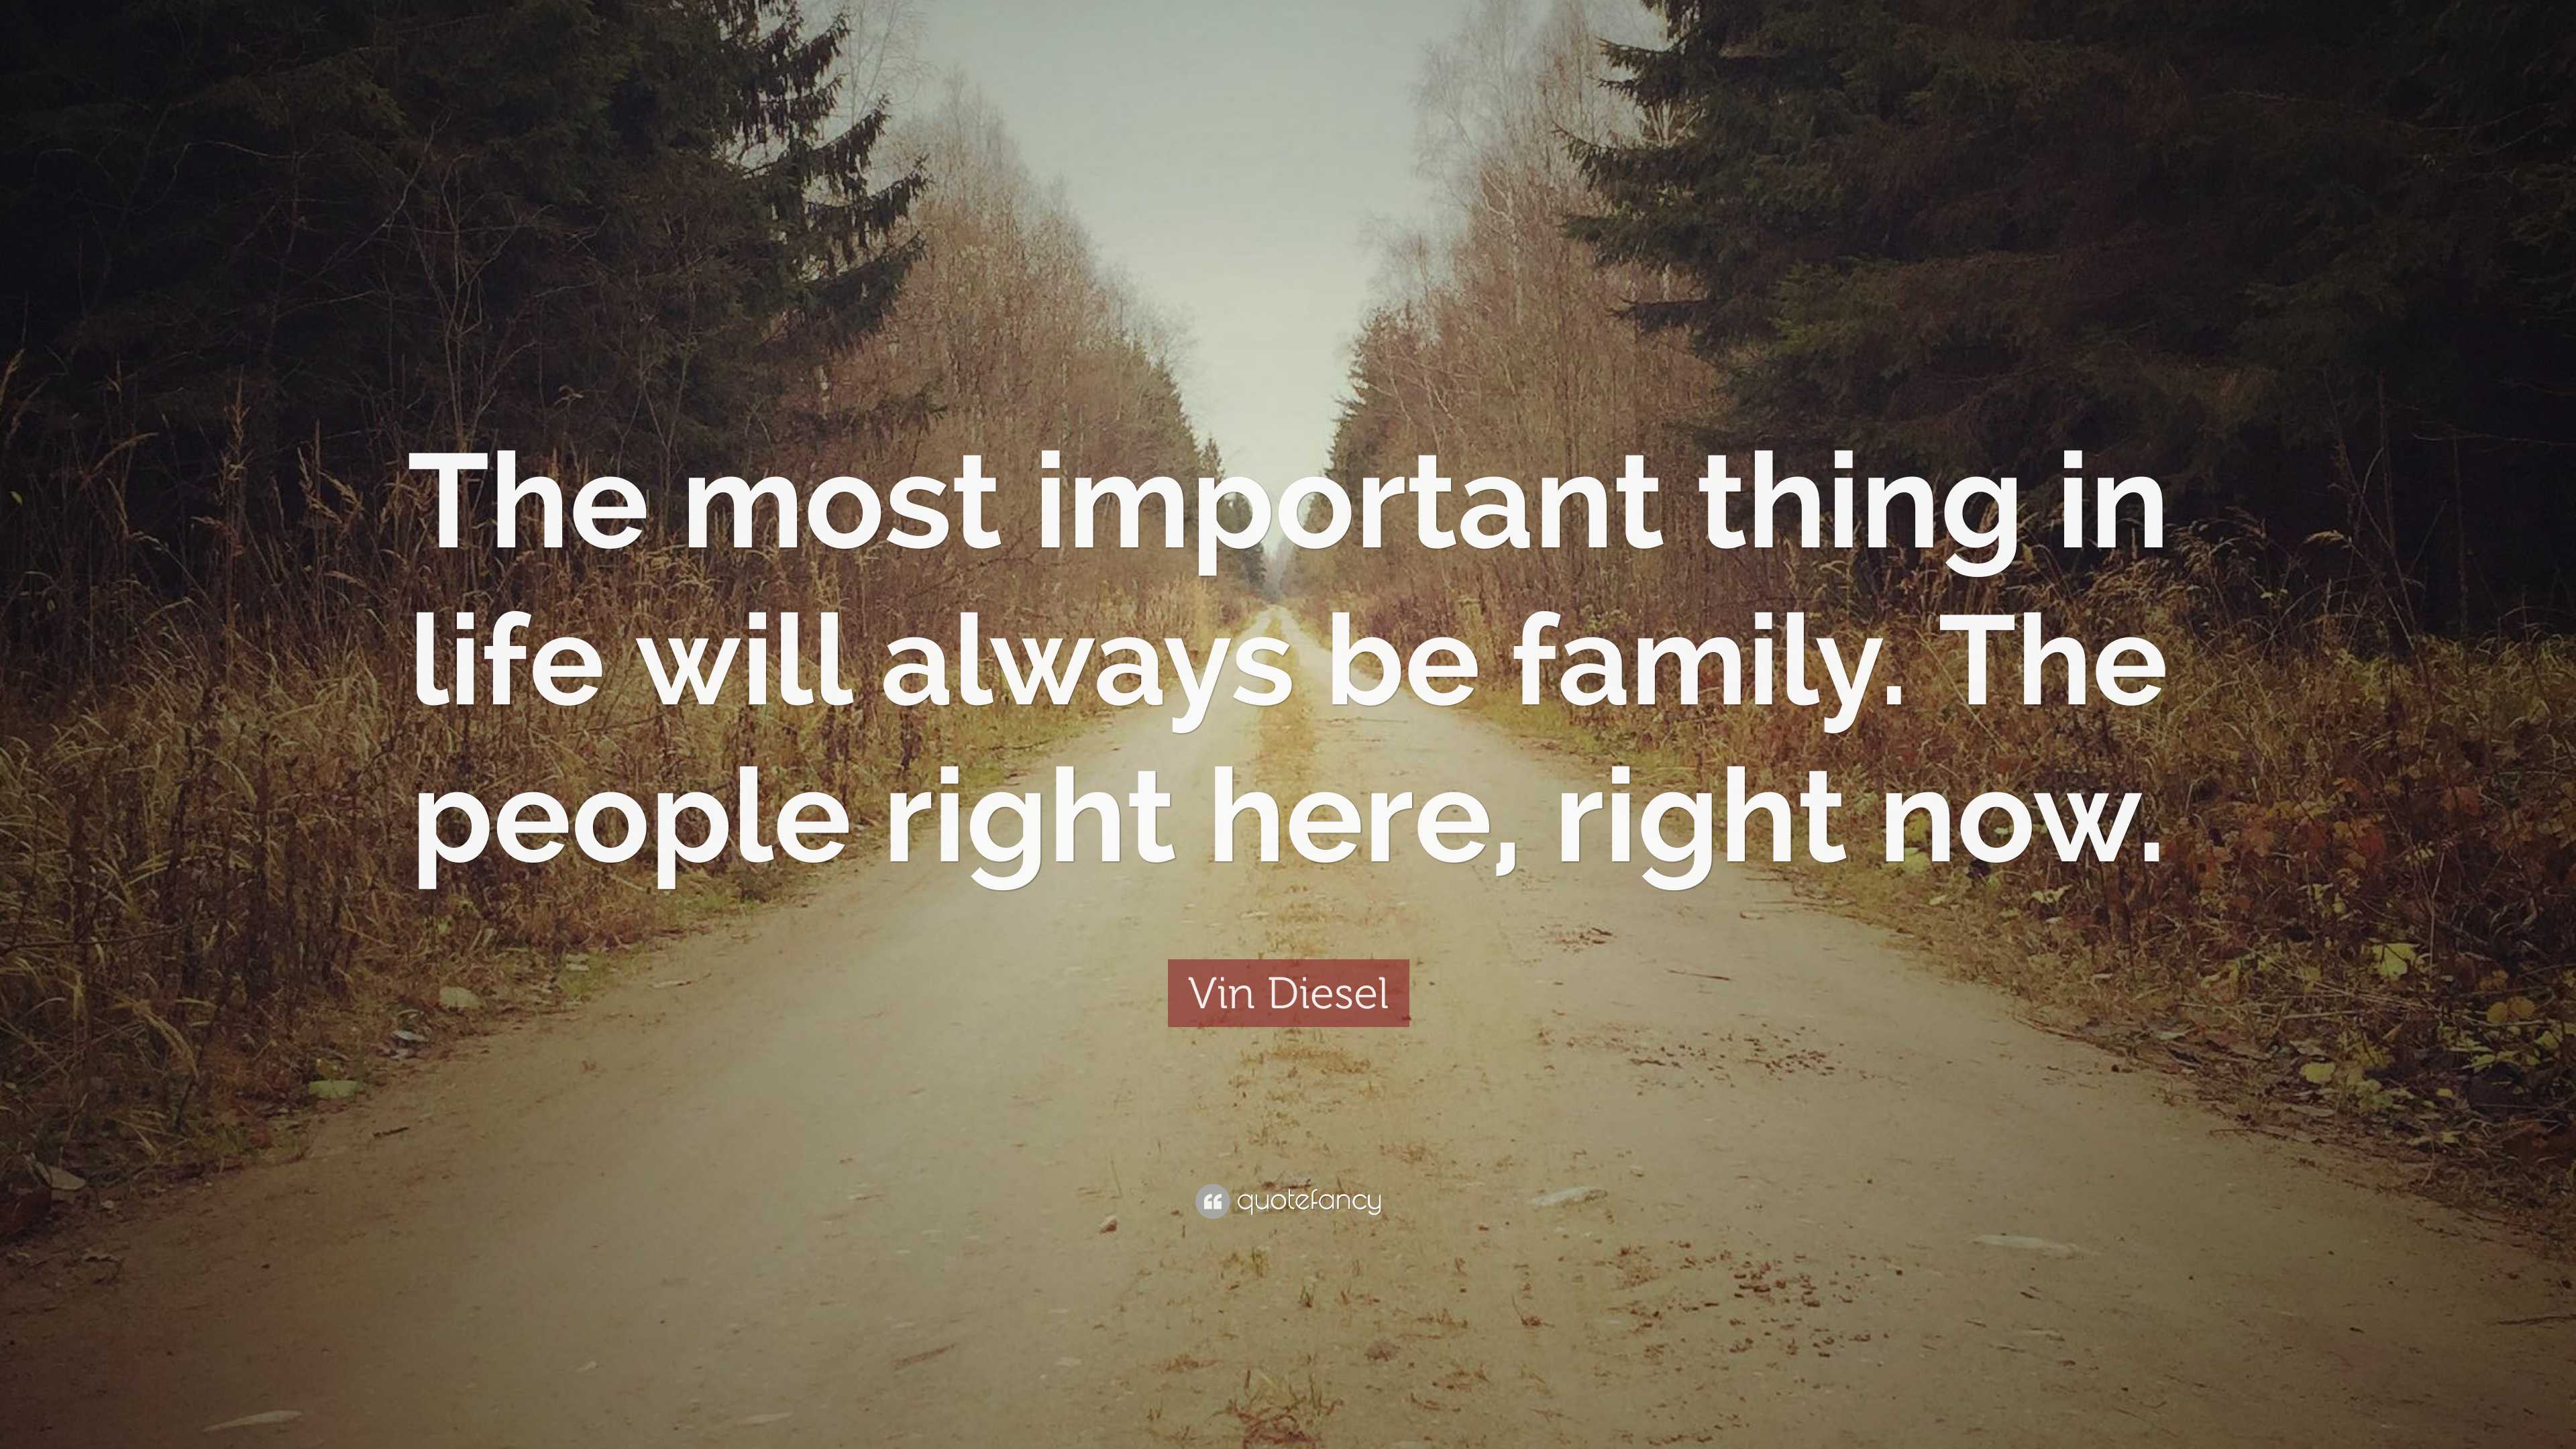 Vin Diesel Quote: “The most important thing in life will always be ...